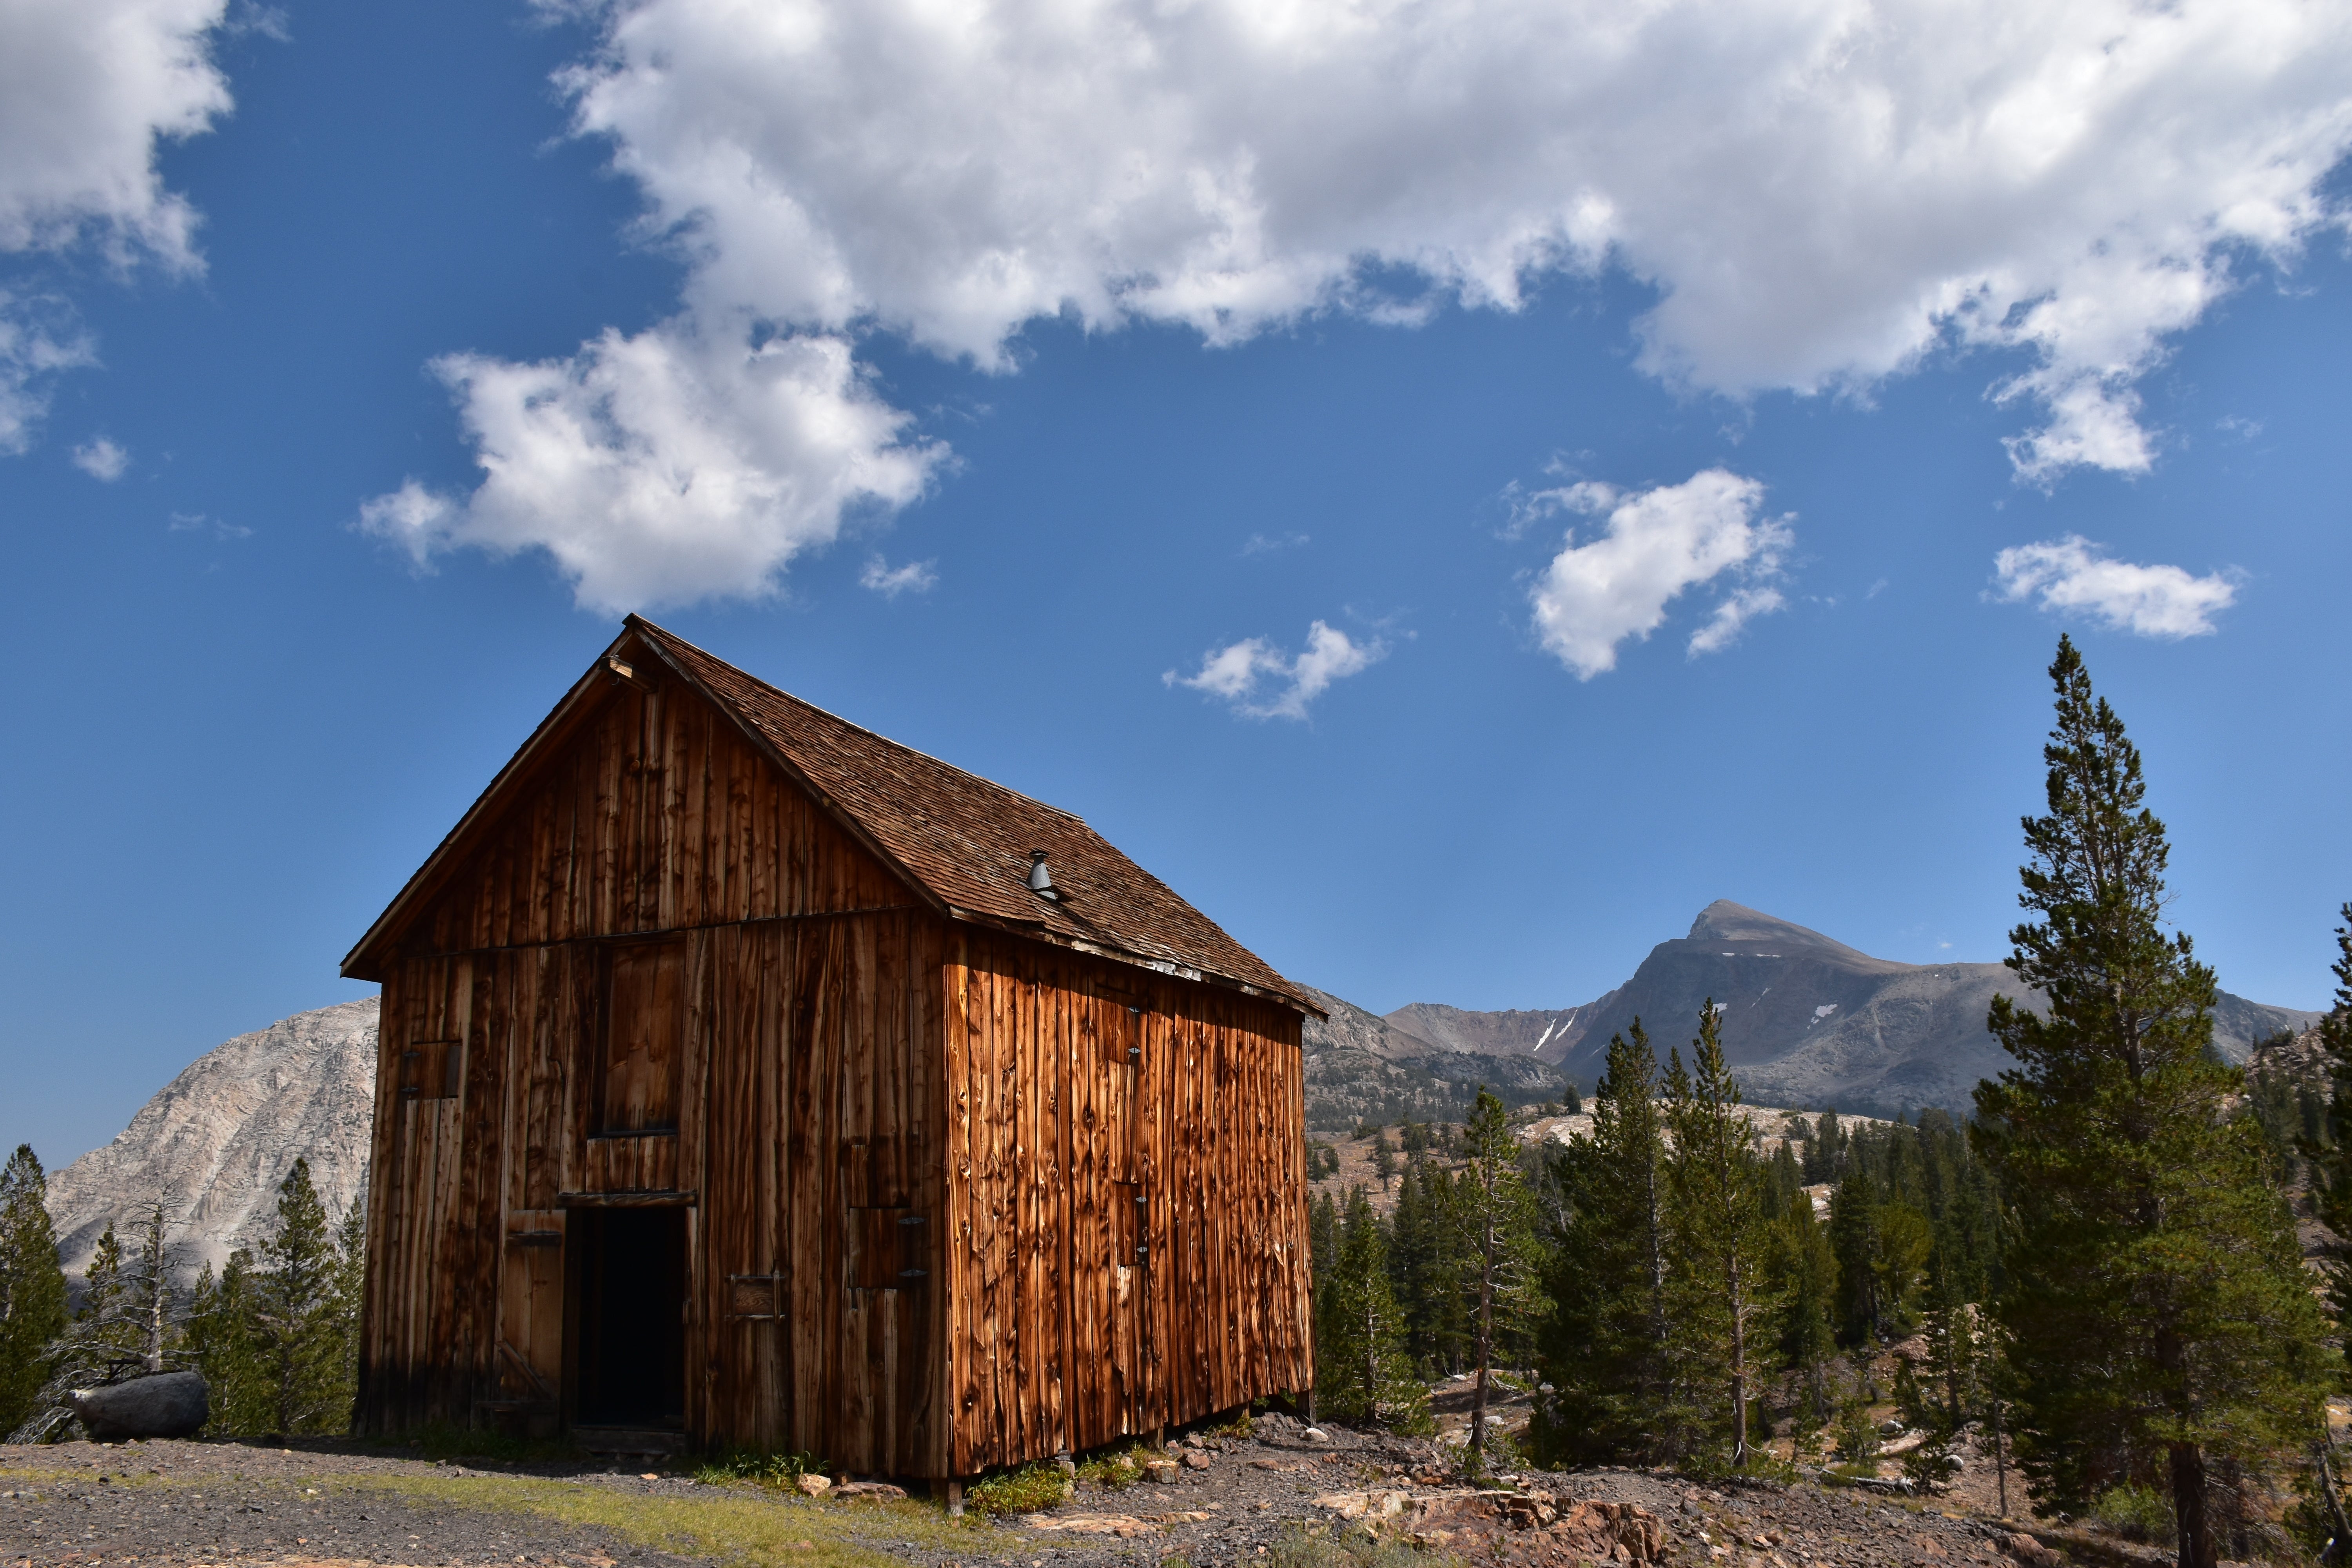 Camper submitted image from Tuolumne Meadows Lodge — Yosemite National Park - 5